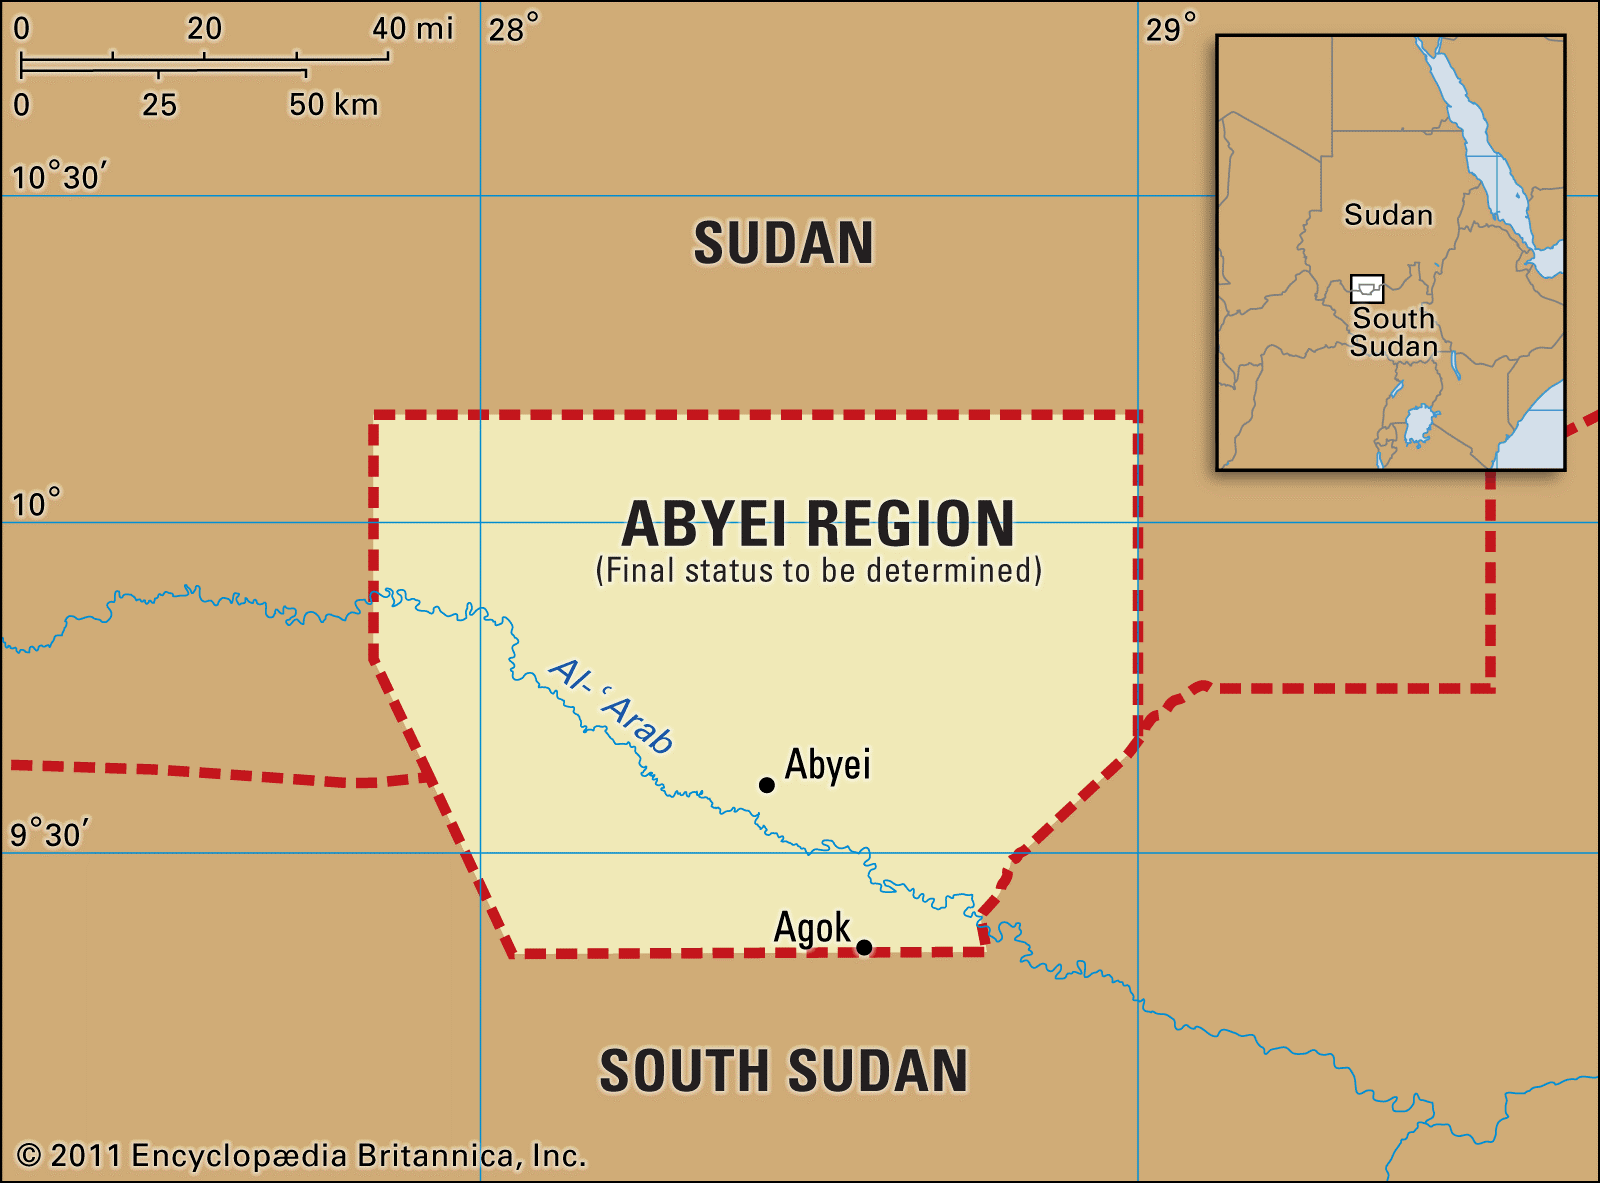 Seven people killed in fresh Abyei attacks